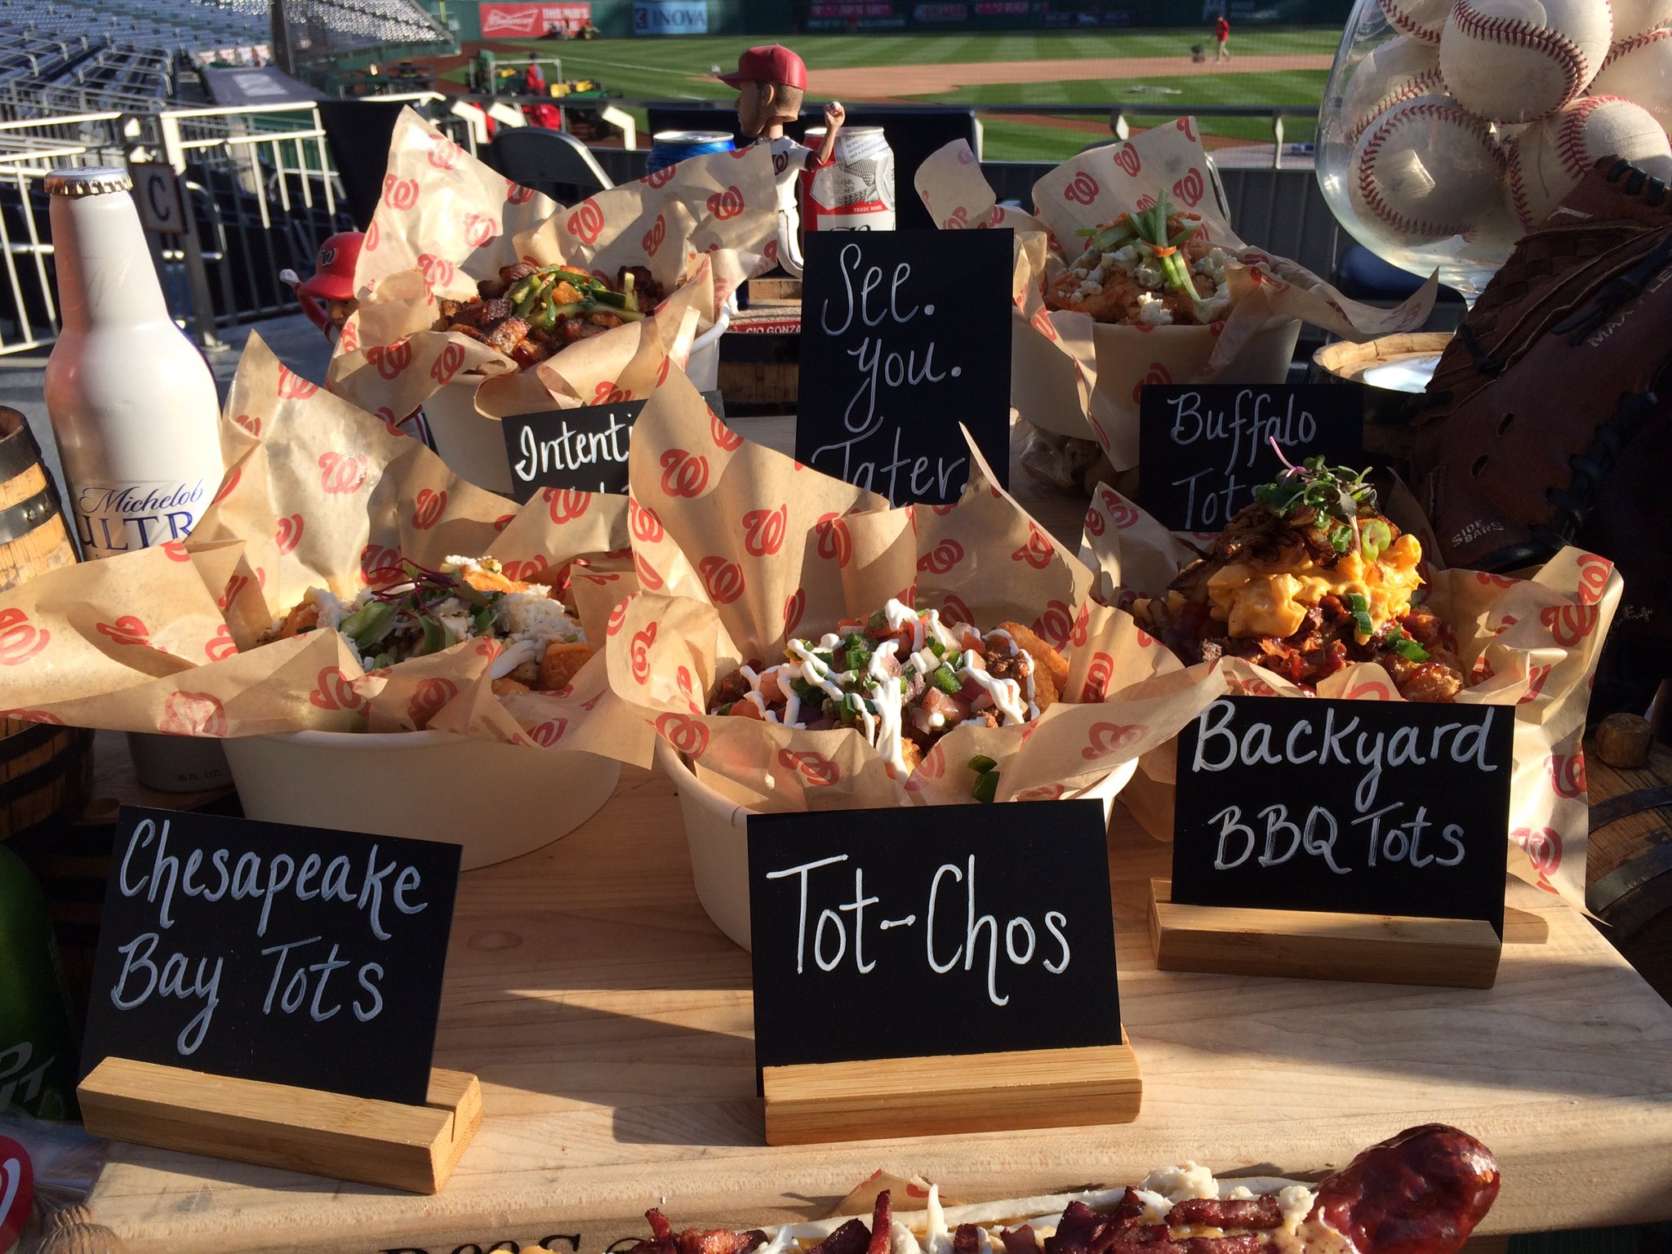 The new concession items at Nationals Park look absolutely mouthwatering. (WTOP/Nick Iannelli)